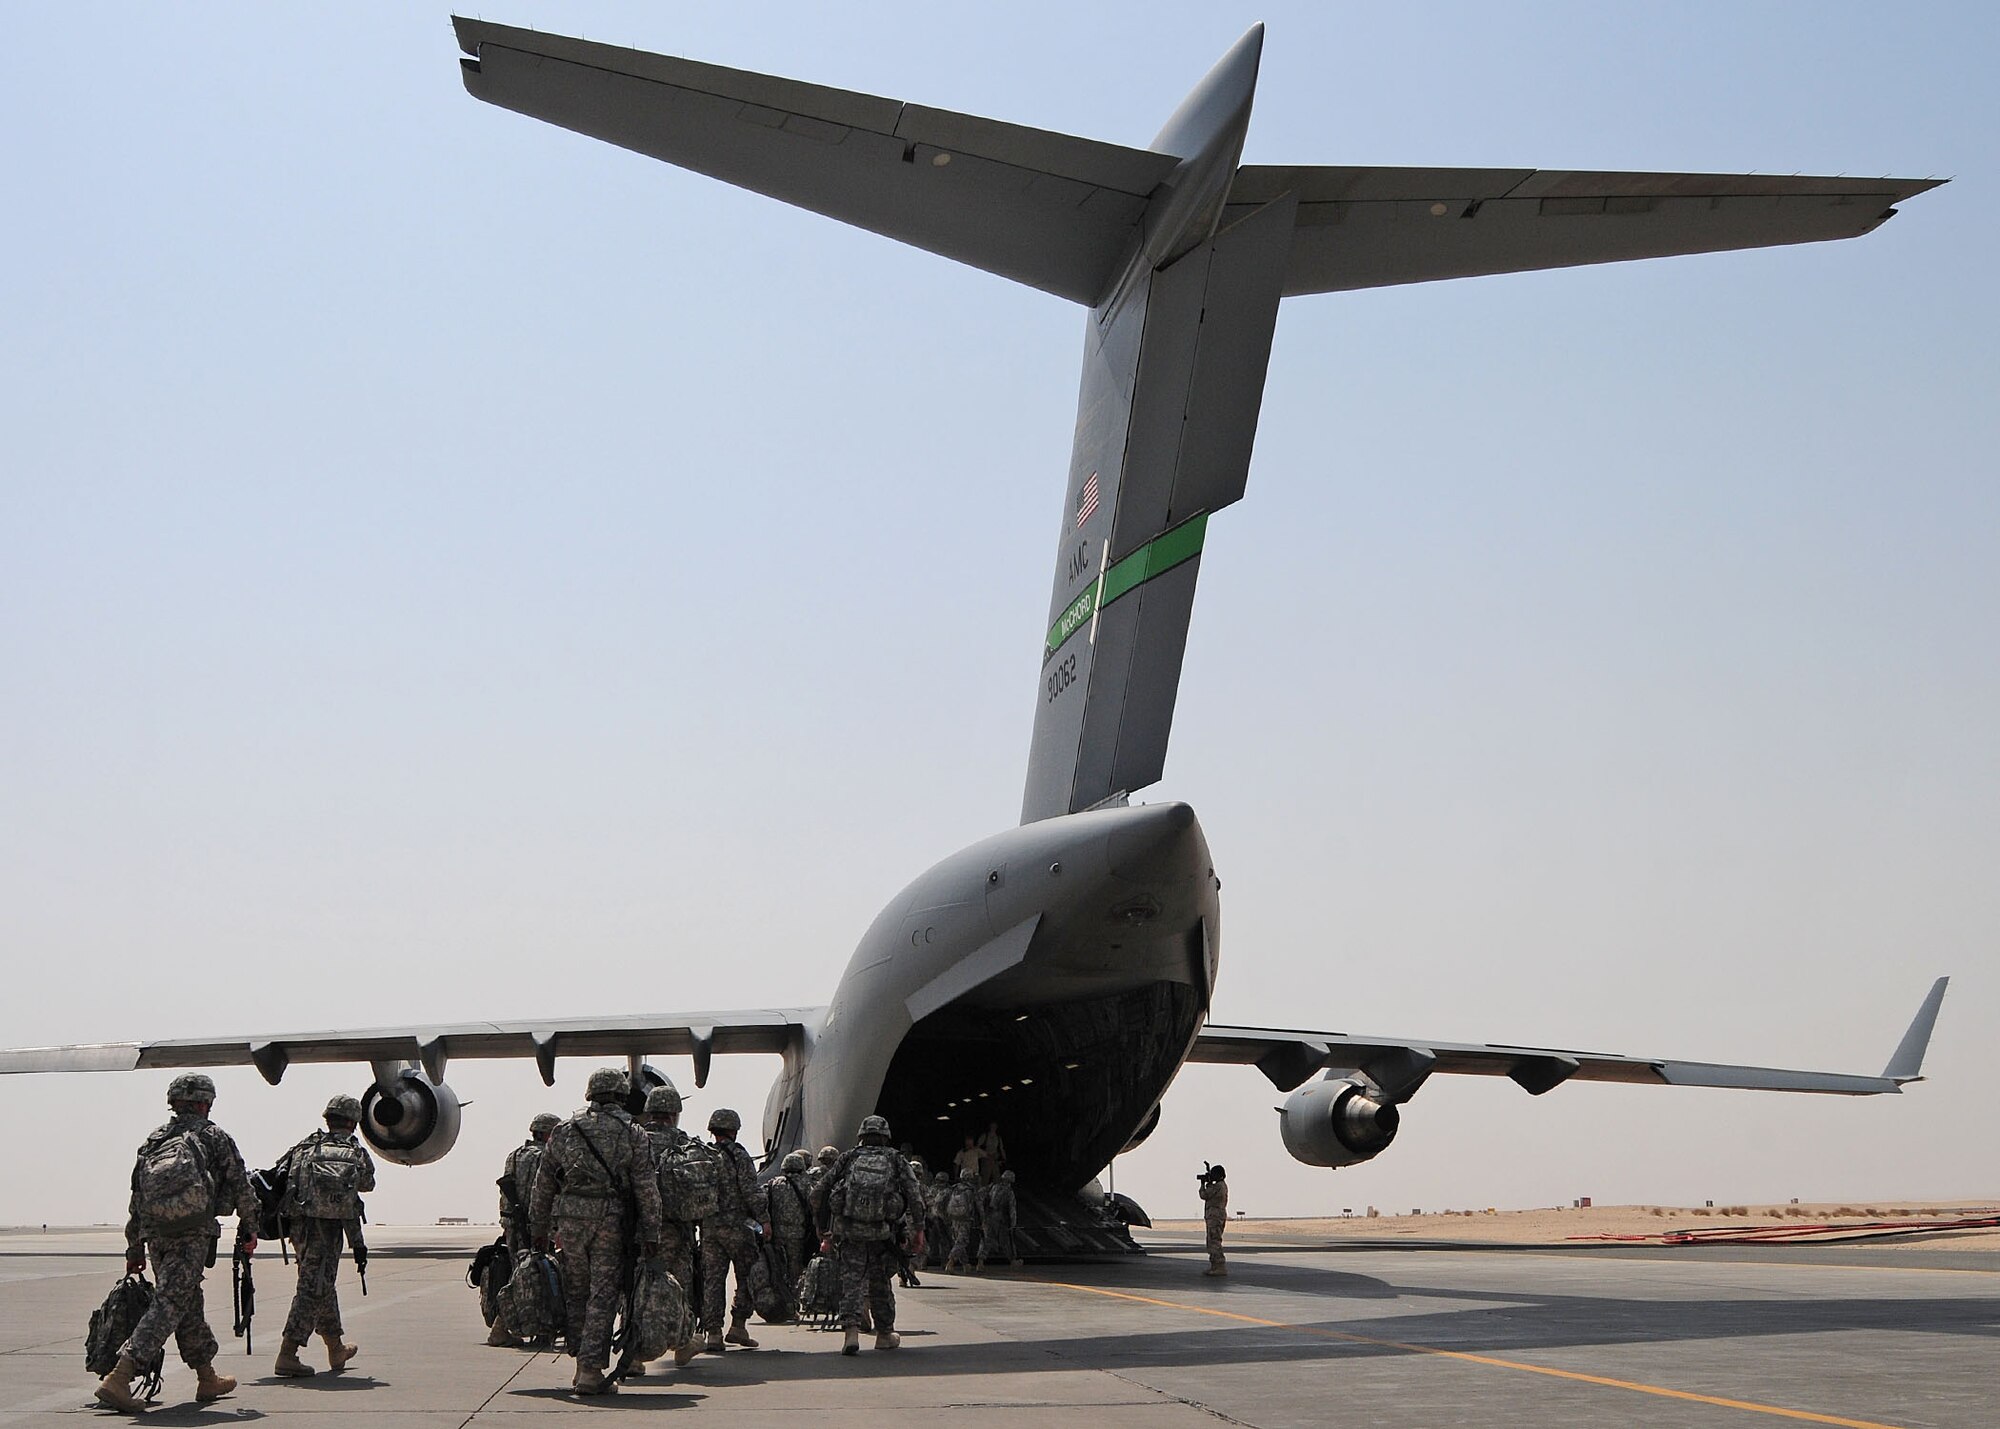 SOUTHWEST ASIA -- U.S. Army personnel from the 3rd Army/Army Central Command prepare to board a 816th Expeditionary Airlift Squadron C-17 Globemaster III on the 386th Air Expeditionary Wing parking ramp at an undisclosed location in Southwest Asia Aug. 21, 2009.  The C-17 is deployed from McChord Air Force Base, Wash.  (U.S. Air Force photo / Tech Sgt. Tony Tolley)